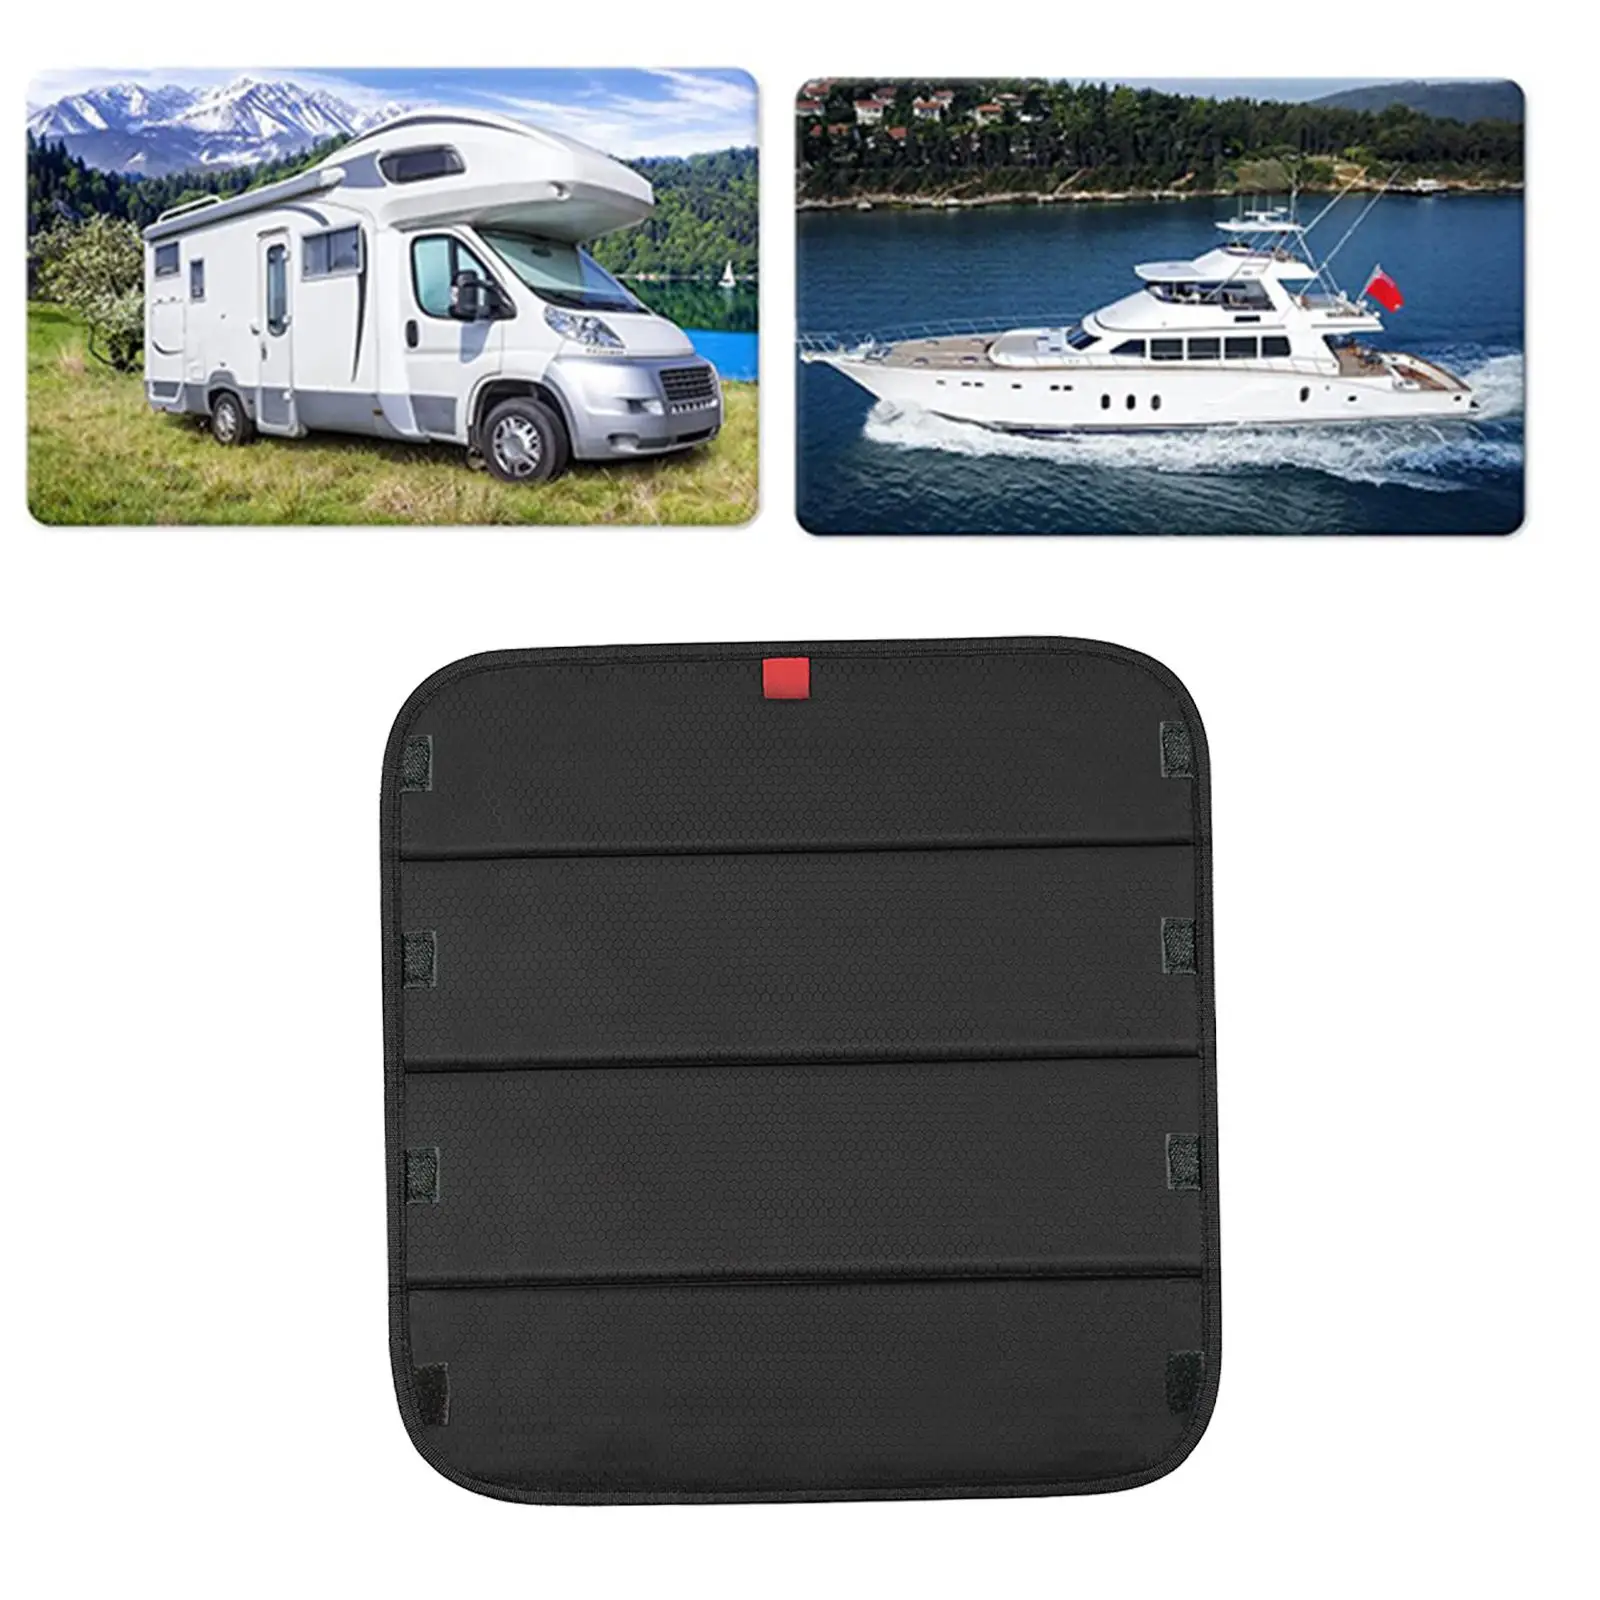 RV Skylight Blackout Cover RV Window Shade RV Roof Vent Cover for Sunroof Camping Camper Marine Applications Travel Trailer